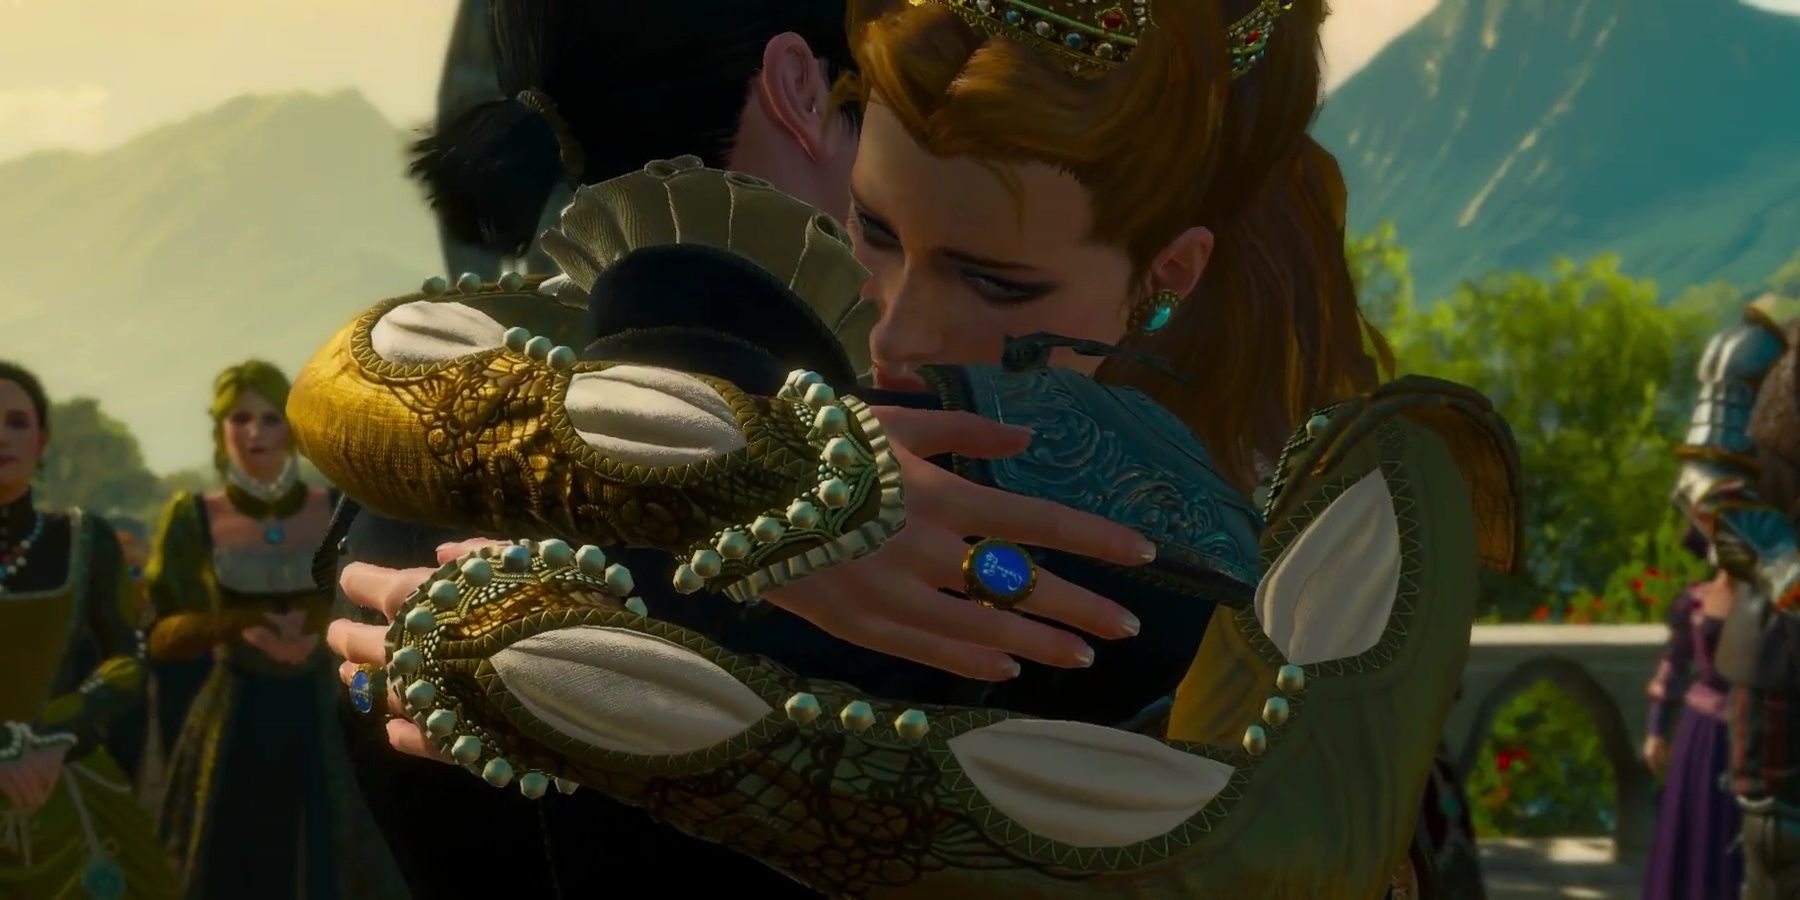 Anna And Syanna hug after making peace in Witcher 3